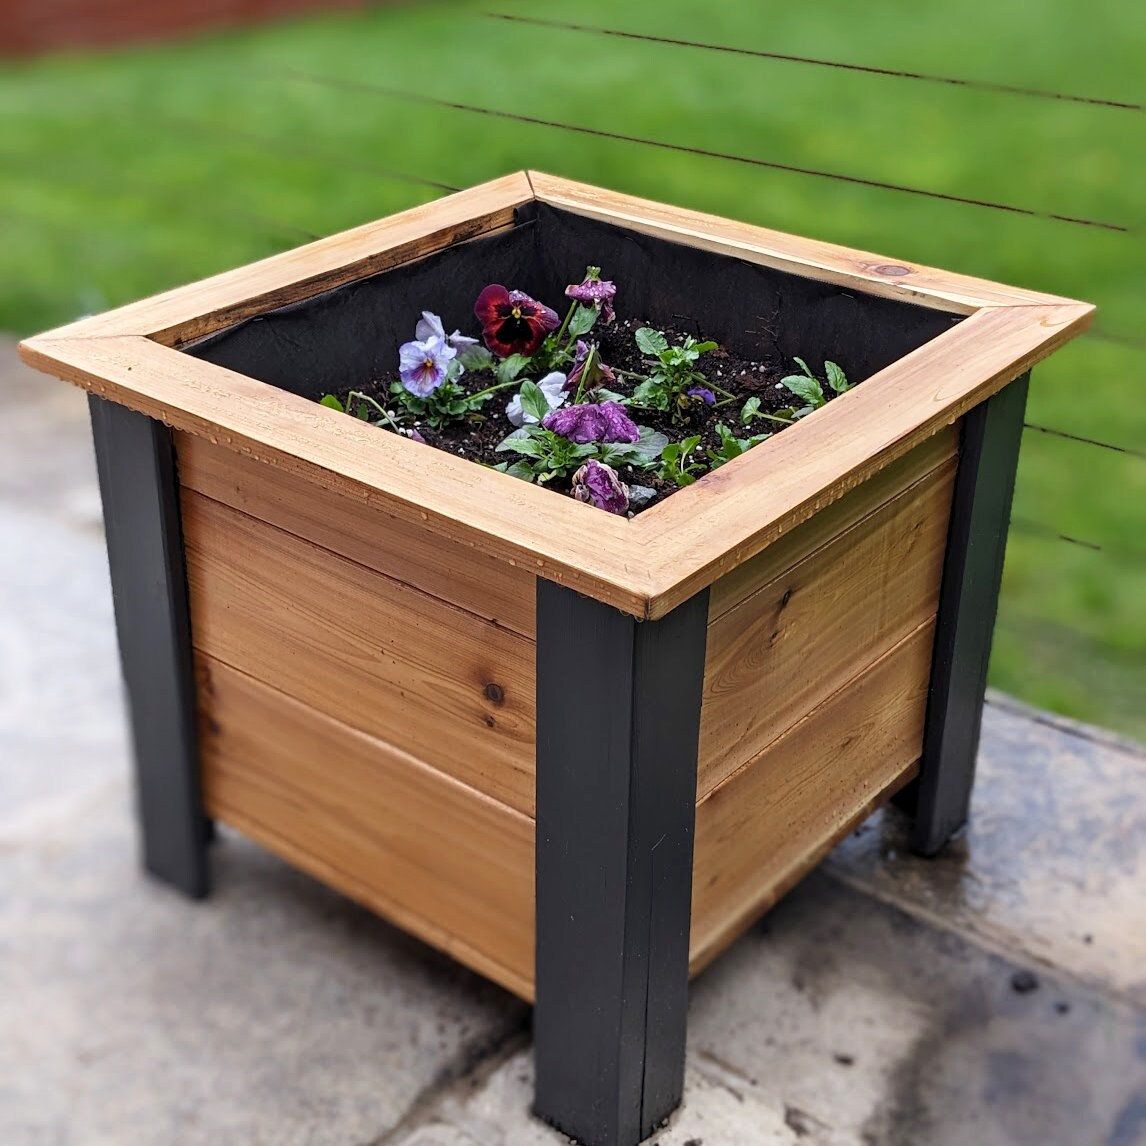 Enhance Your Garden with Charming Wooden Planters